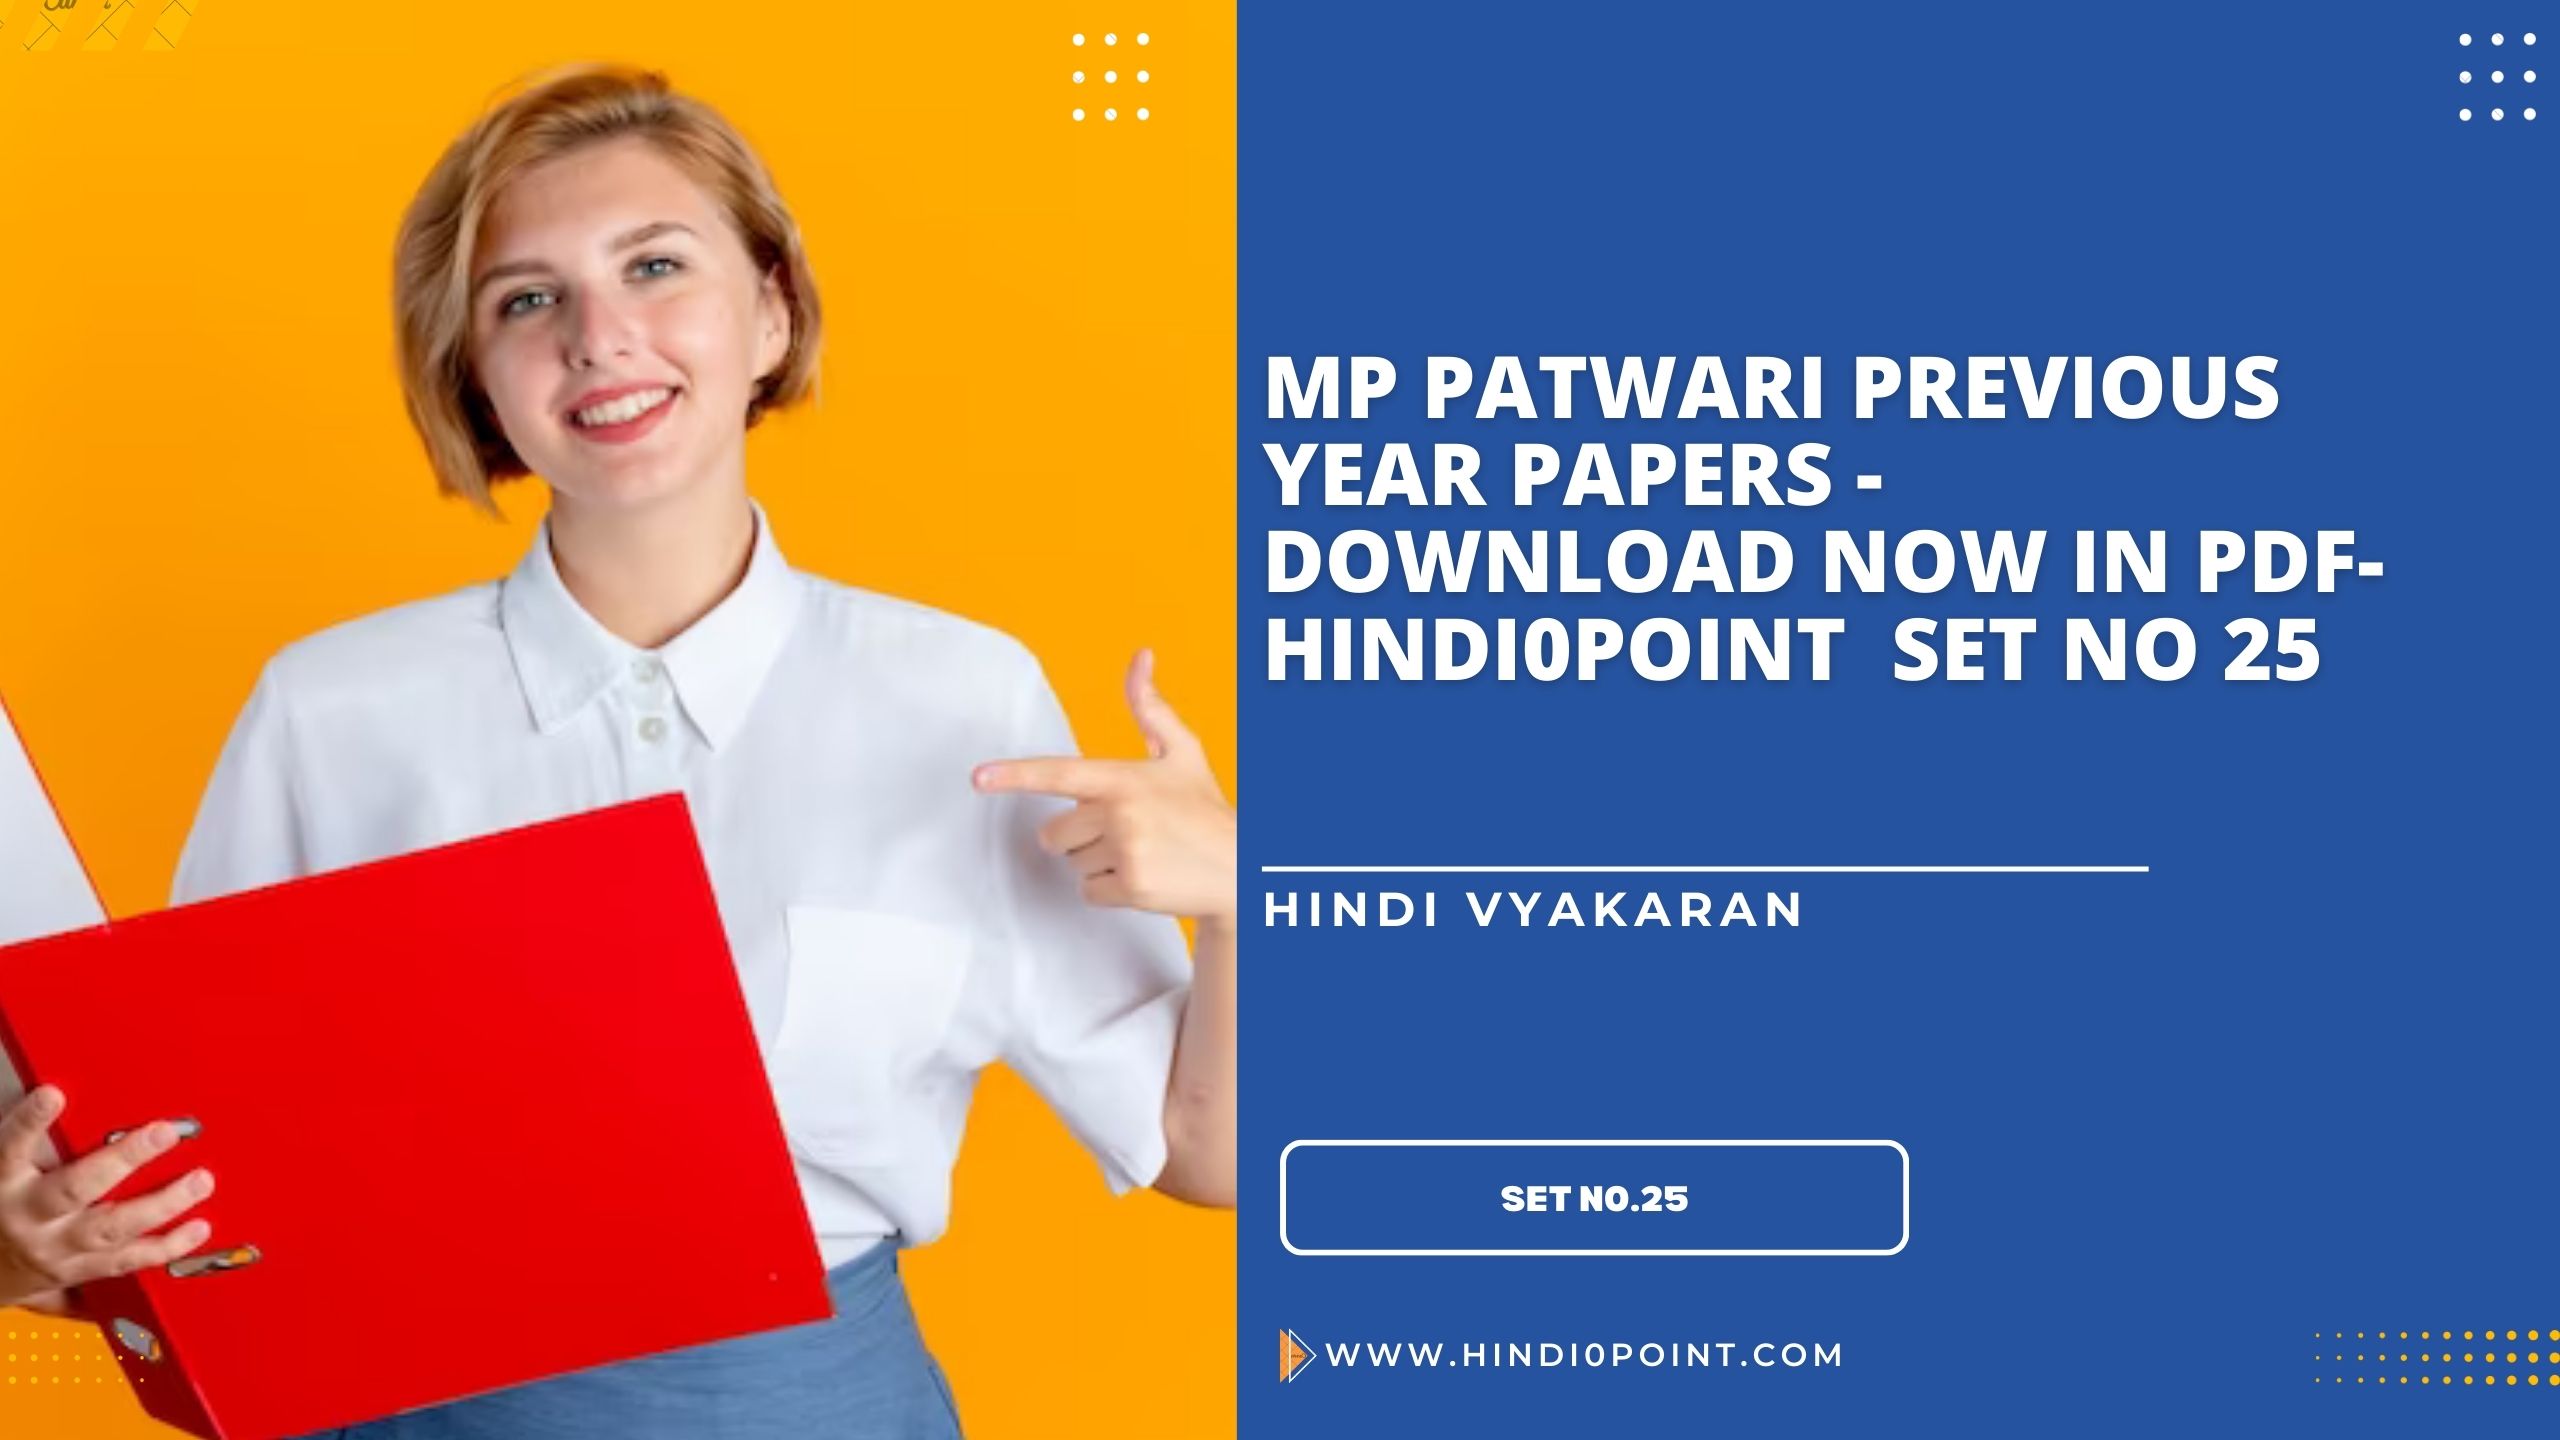 MP Patwari Previous Year Papers - Download now in PDF-hindi0point set no 25